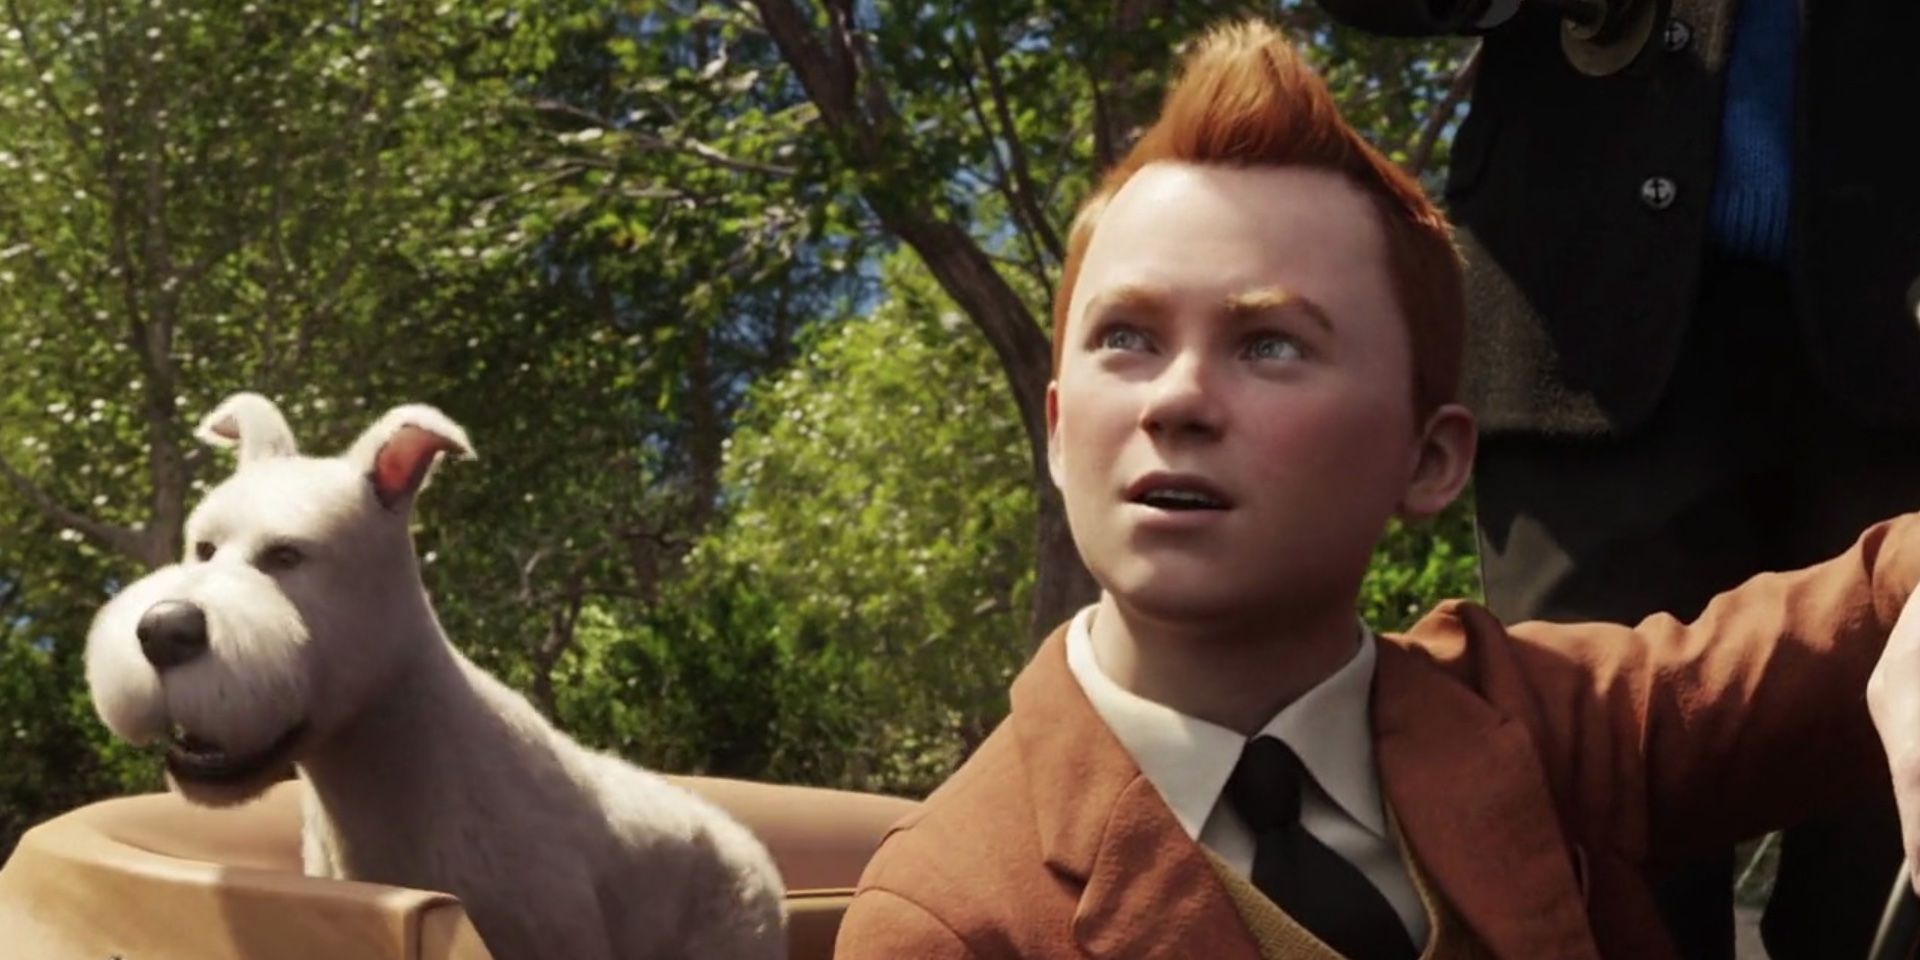 Tintin (Jaime Bell) and a white dog in 'The Adventures of Tintin'